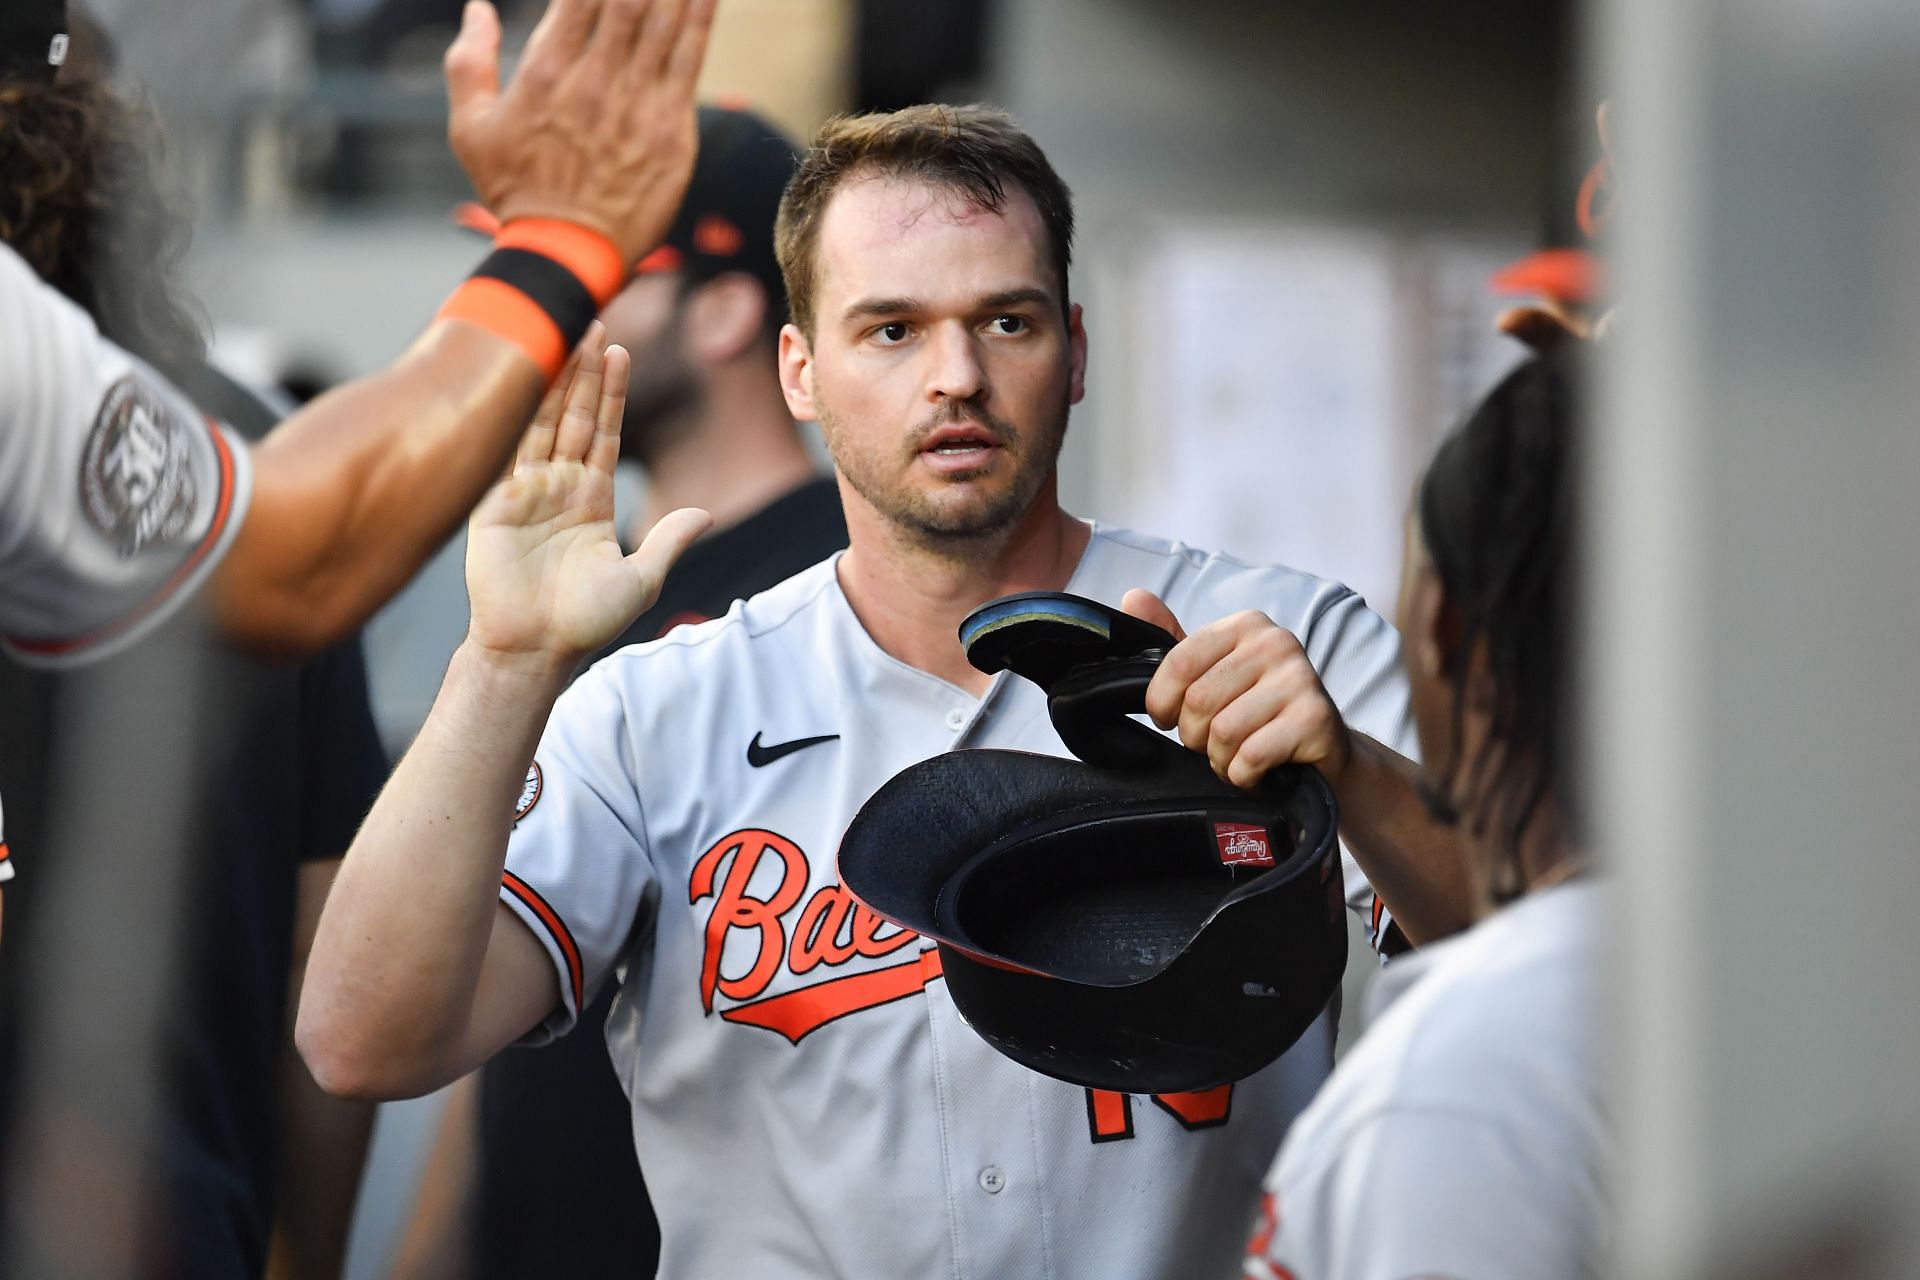 New trade rumors swirl about Trey Mancini of the Baltimore Orioles.